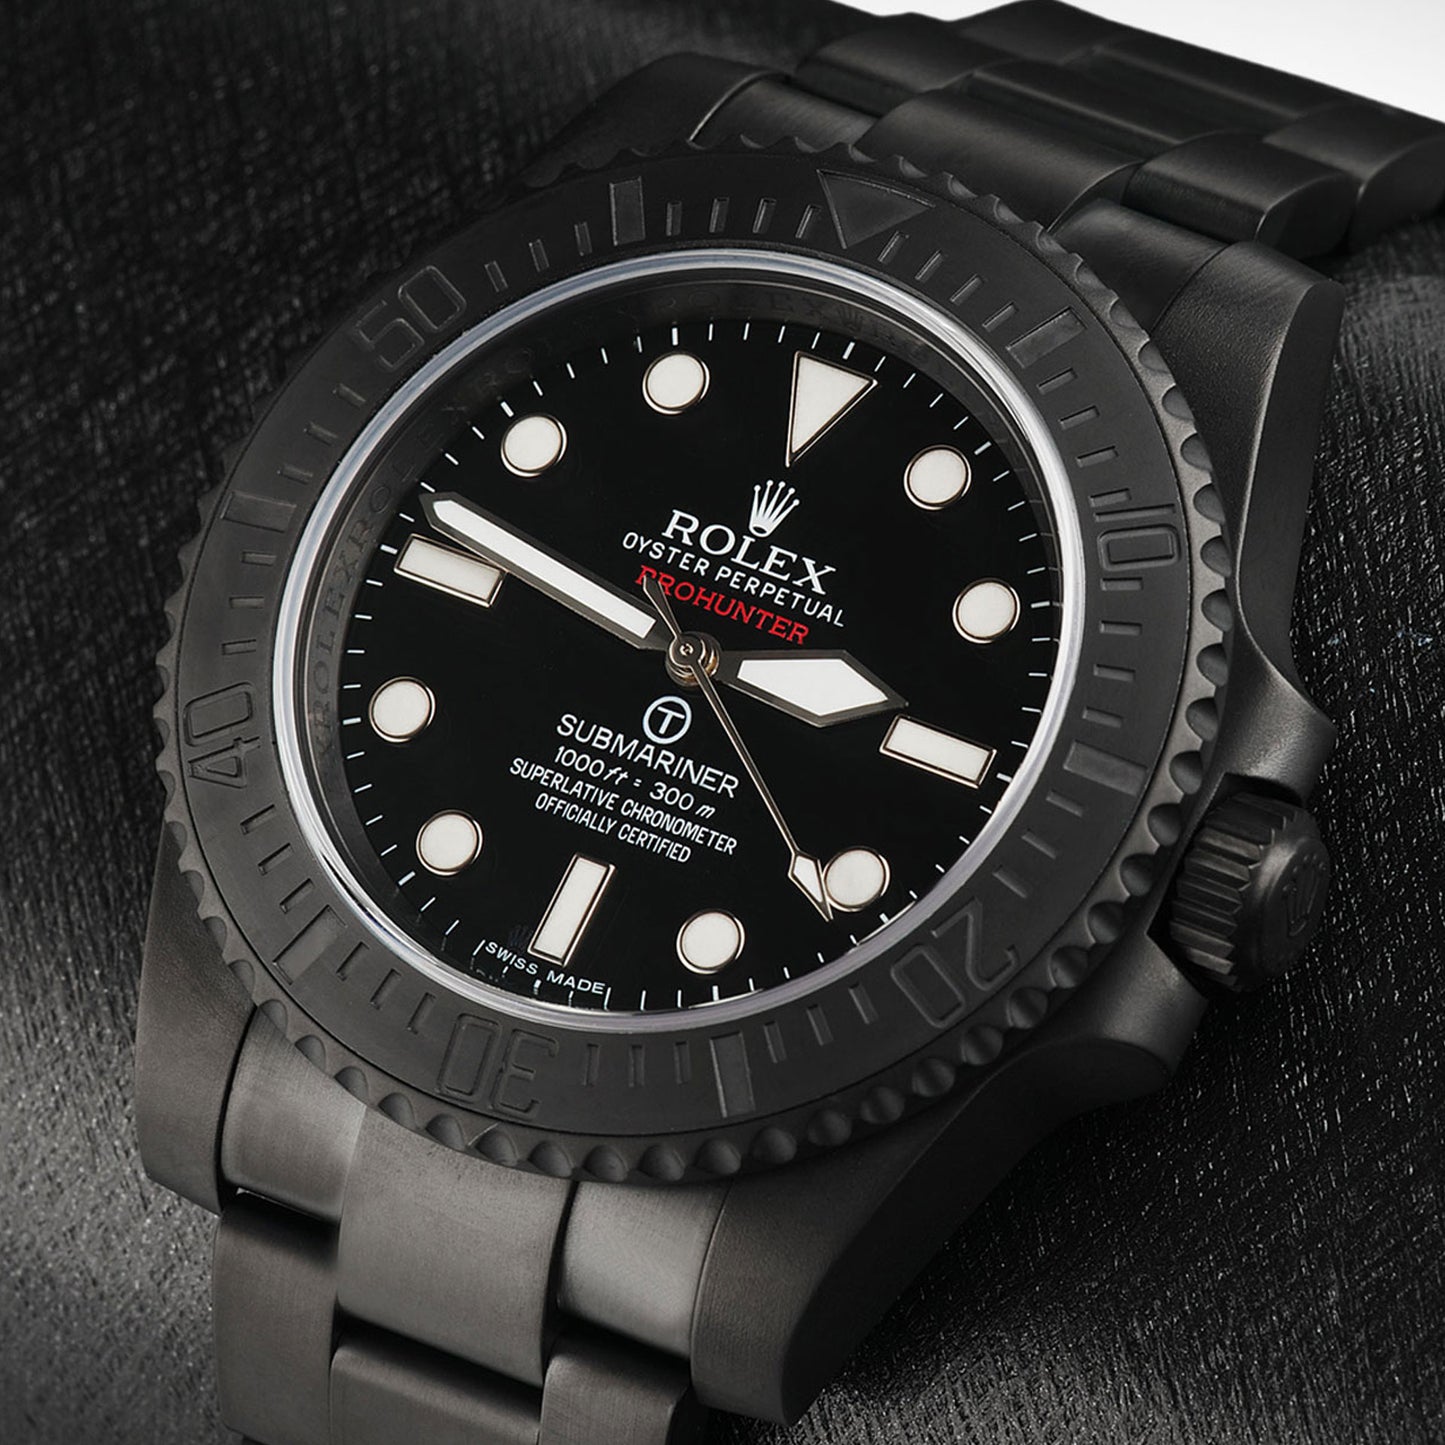 Pro Hunter Submariner Military Stealth Watch